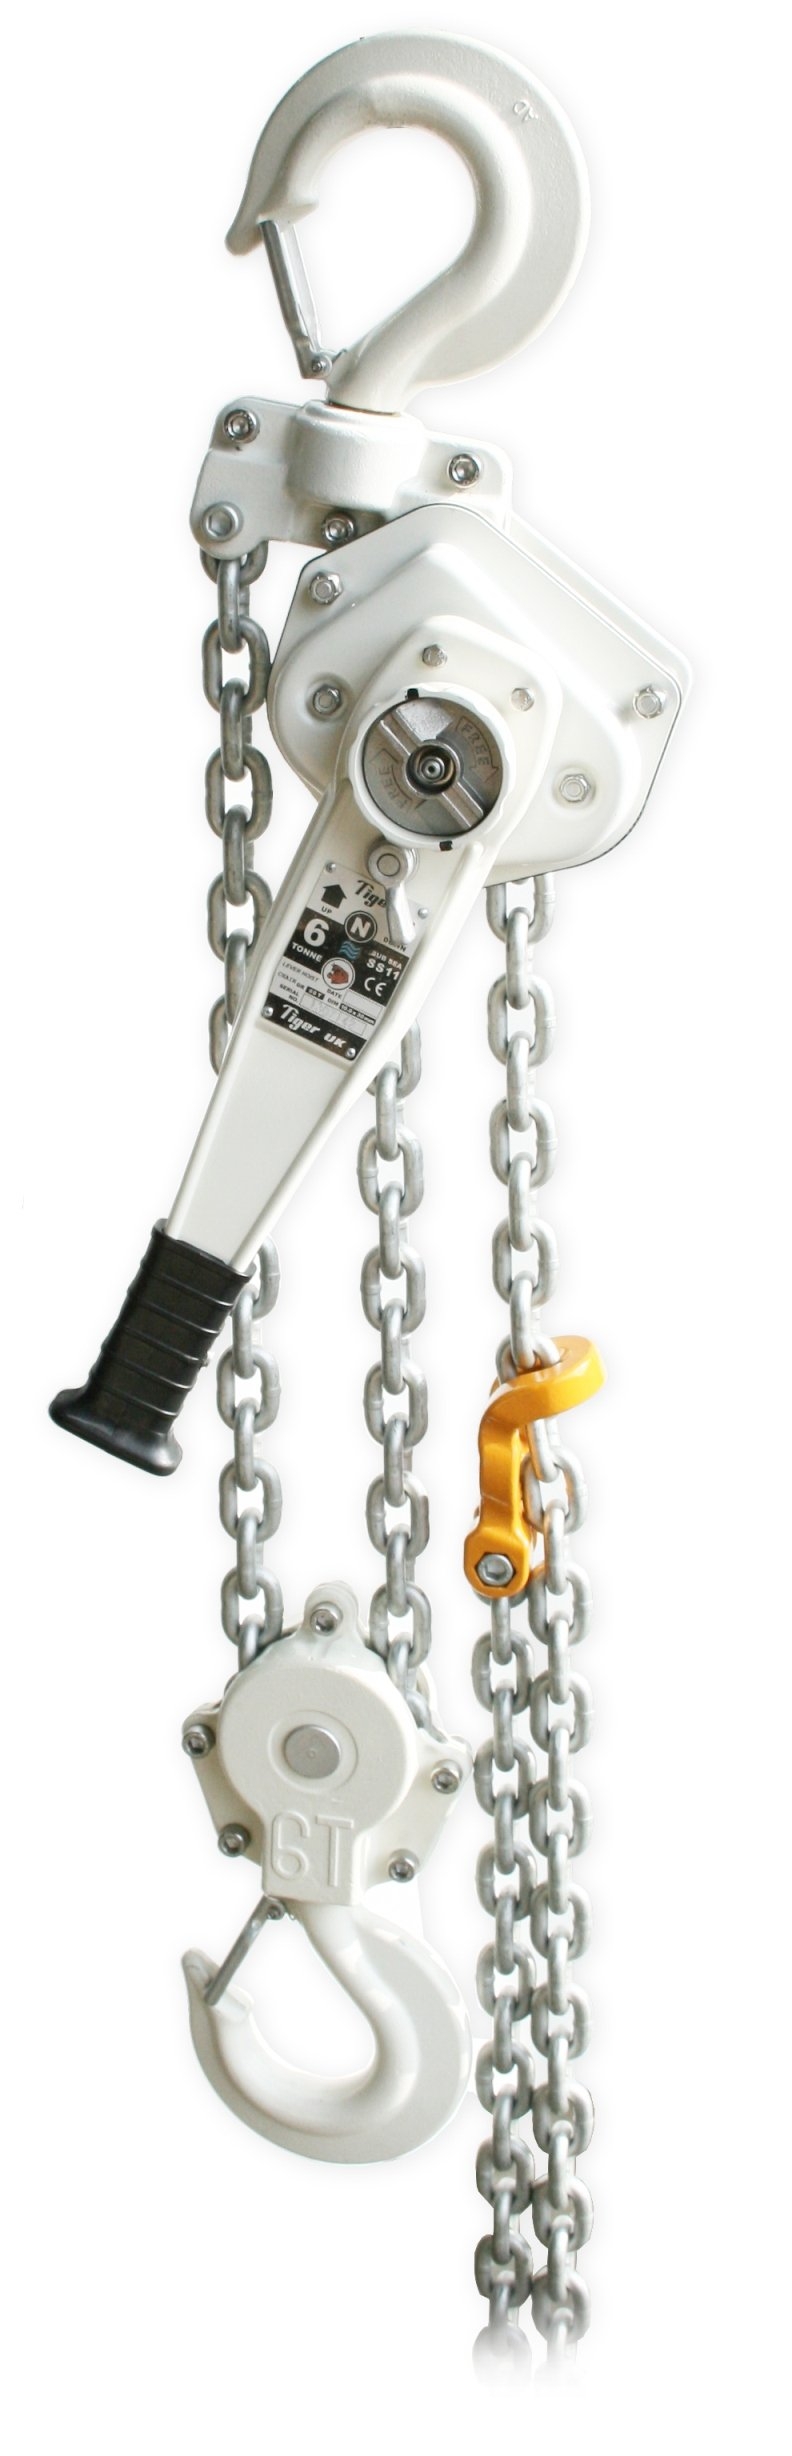 Hoistshop – Tiger Subsea Lever Hoist Type SS11 – 15.0T Capacity – 210-41 – 7.0m – Stainless Steel – White / Silver